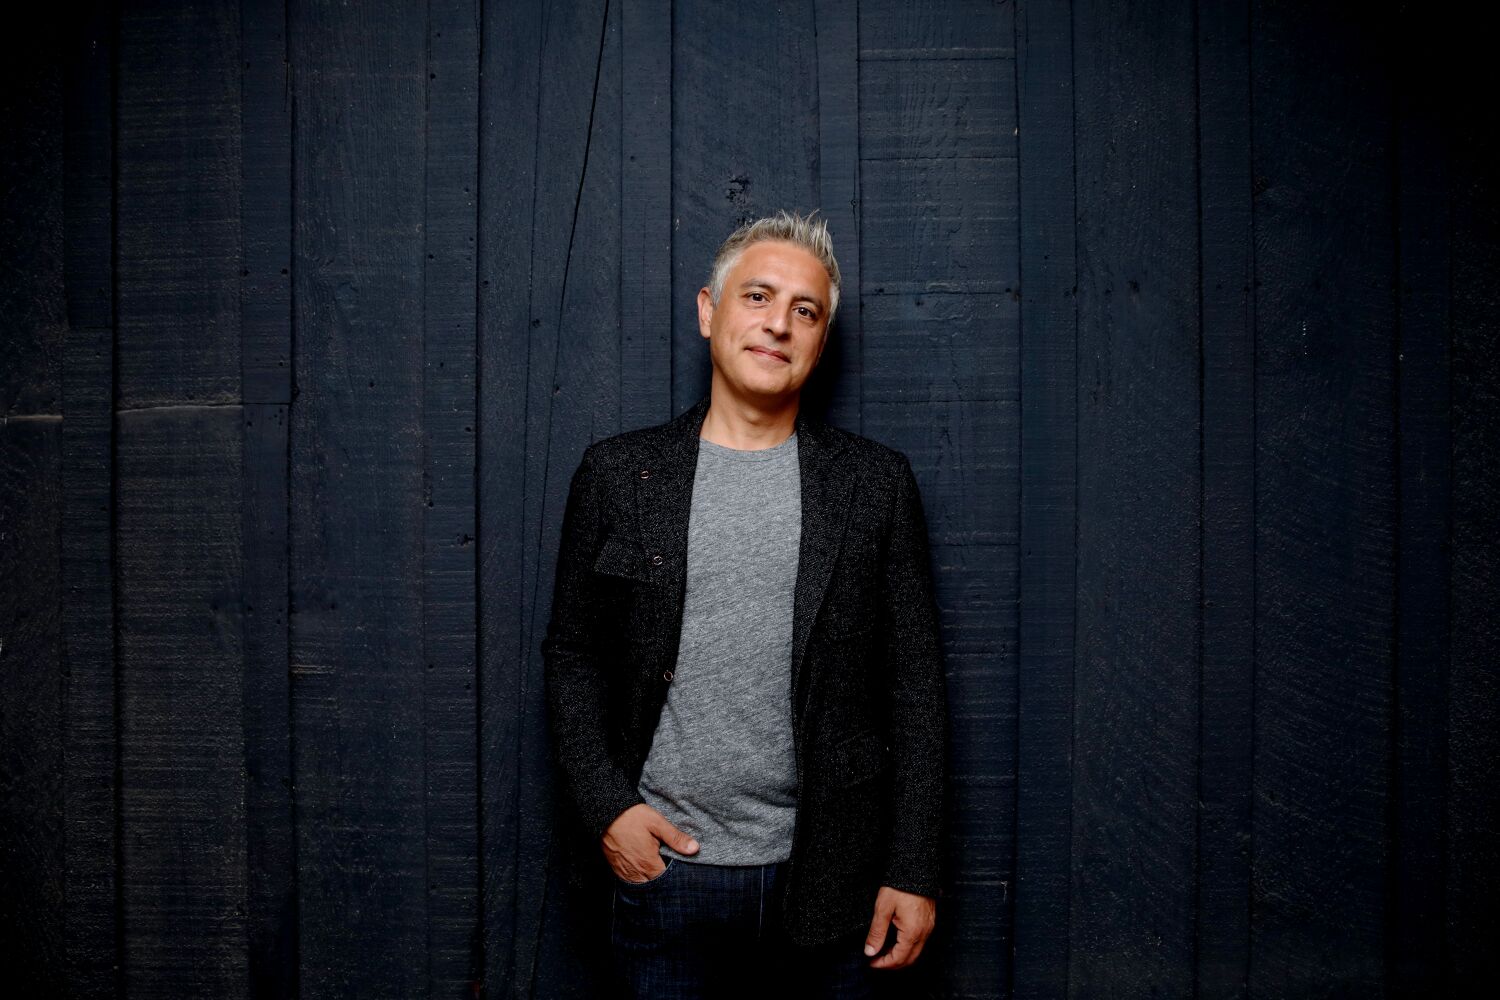 Reza Aslan on Tehrangeles, revolution and the death threats that sidelined his book tour